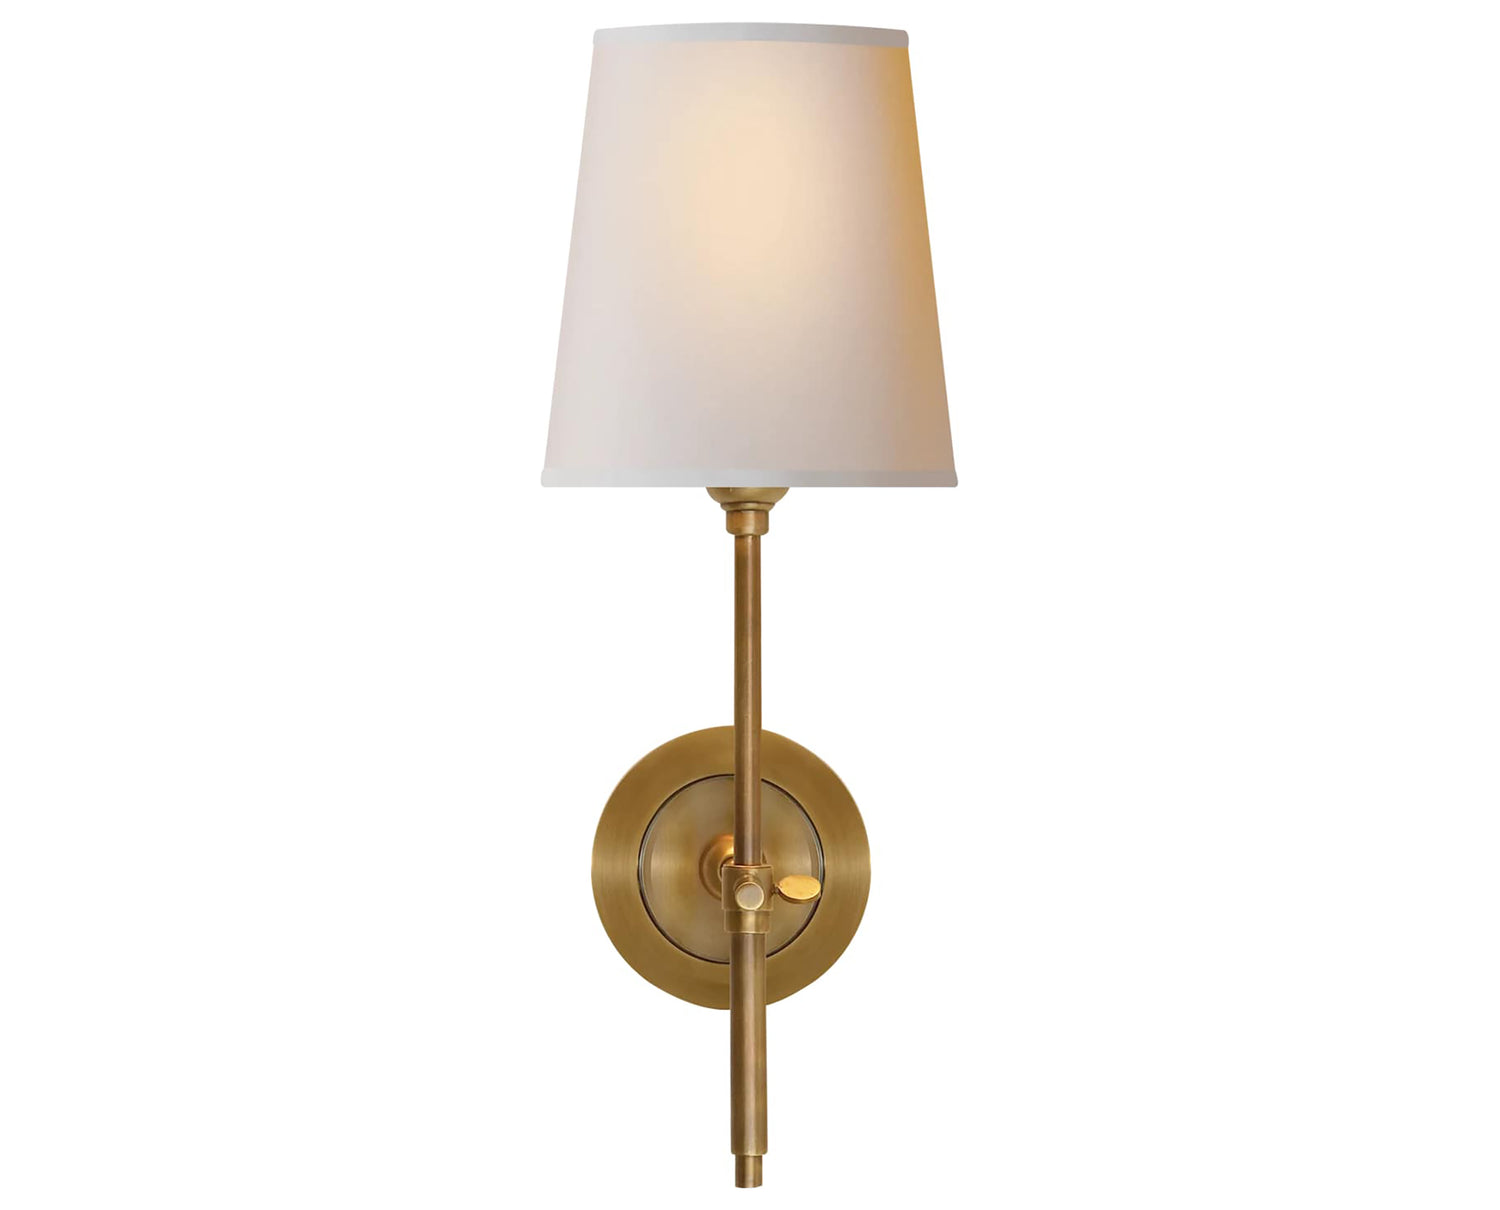 Hand-Rubbed Antique Brass & Natural Paper | Bryant Sconce - Natural Paper Shade | Valley Ridge Furniture